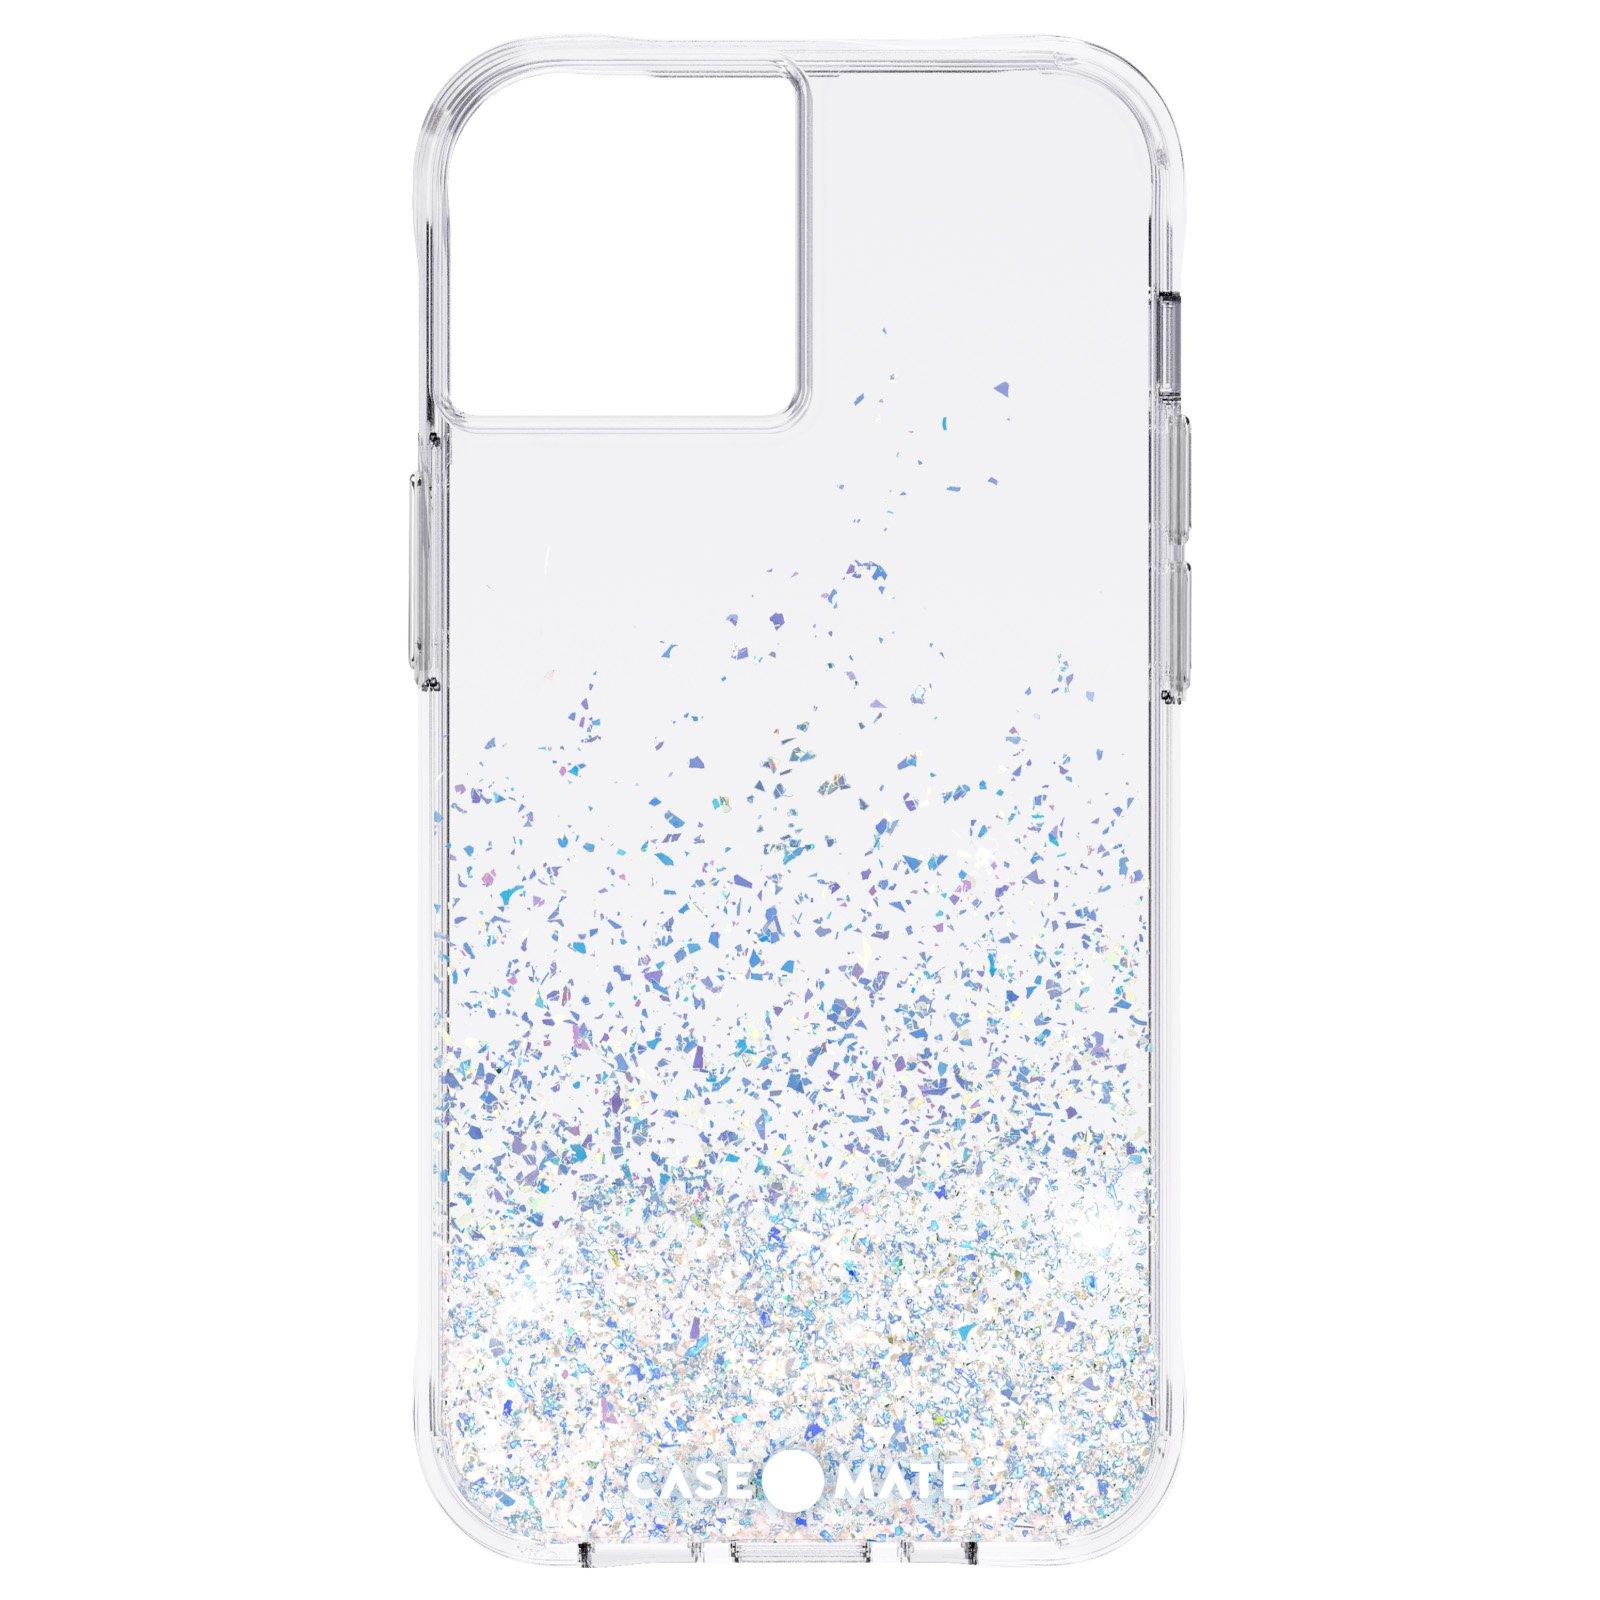 Twinkle (Stardust) - iPhone 13 Pro Phone Case